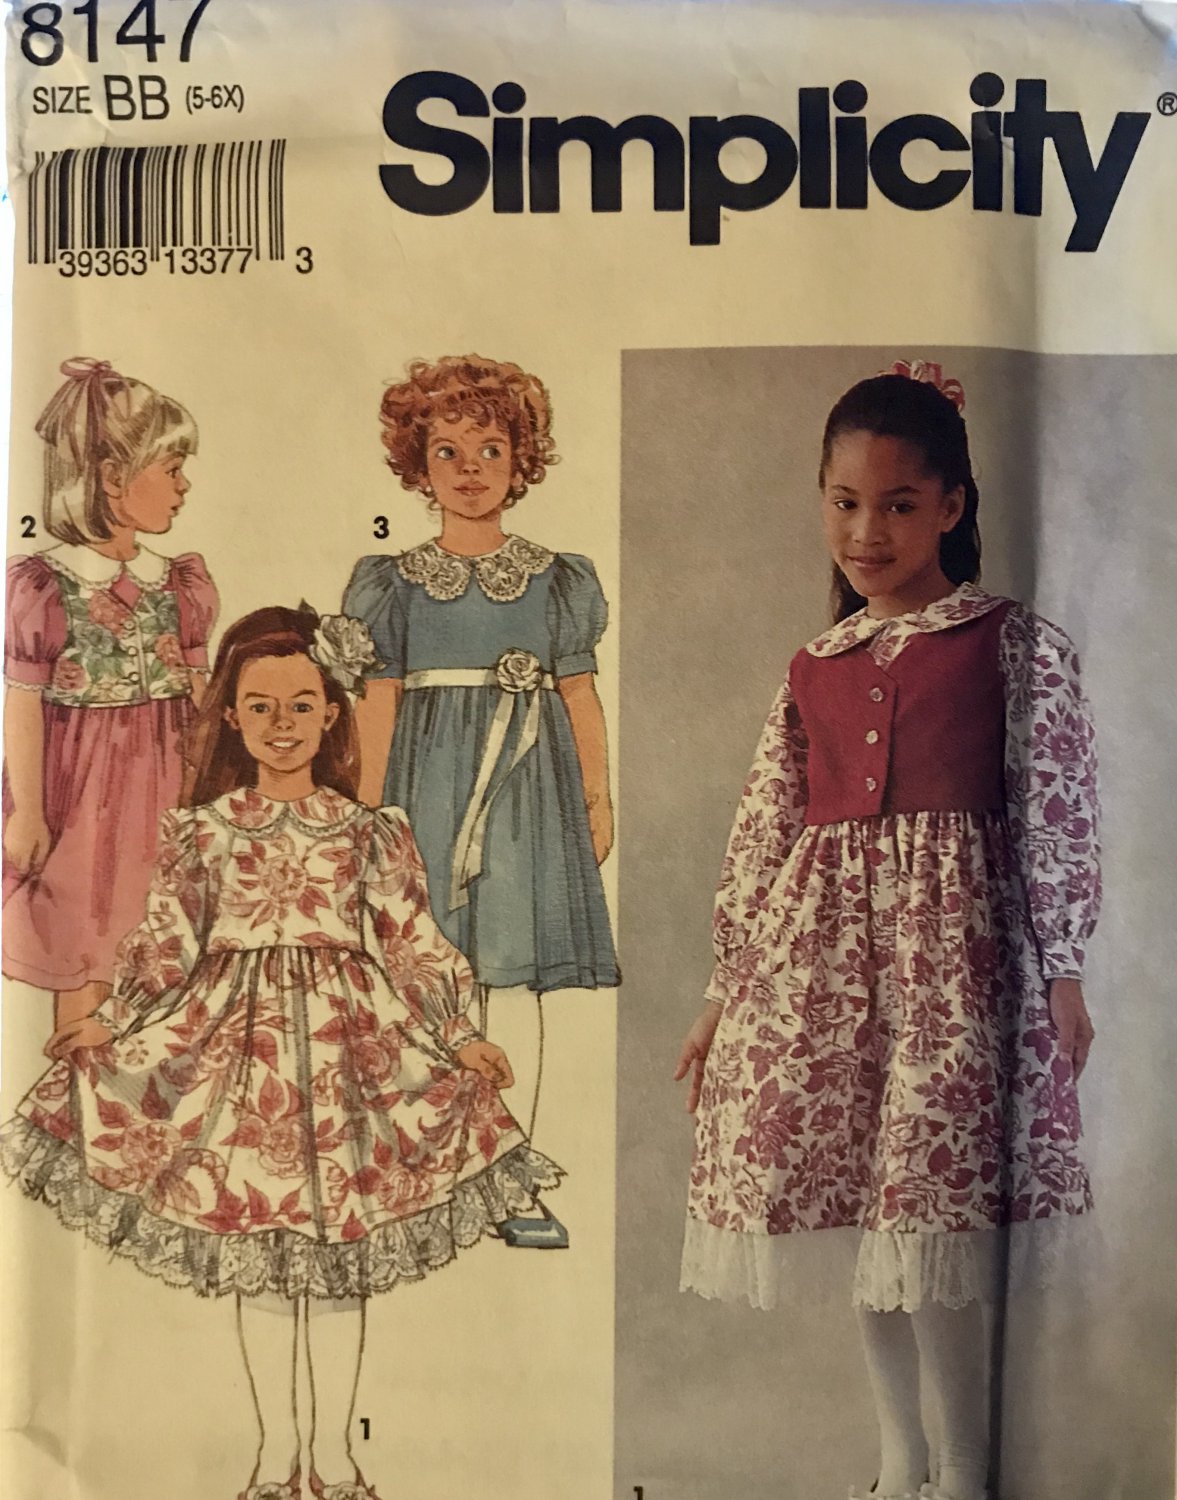 Simplicity Sewing Pattern 8147 Girls Below Knee Length Dress with Gathered Skirt, Vest Size 5 - 6X